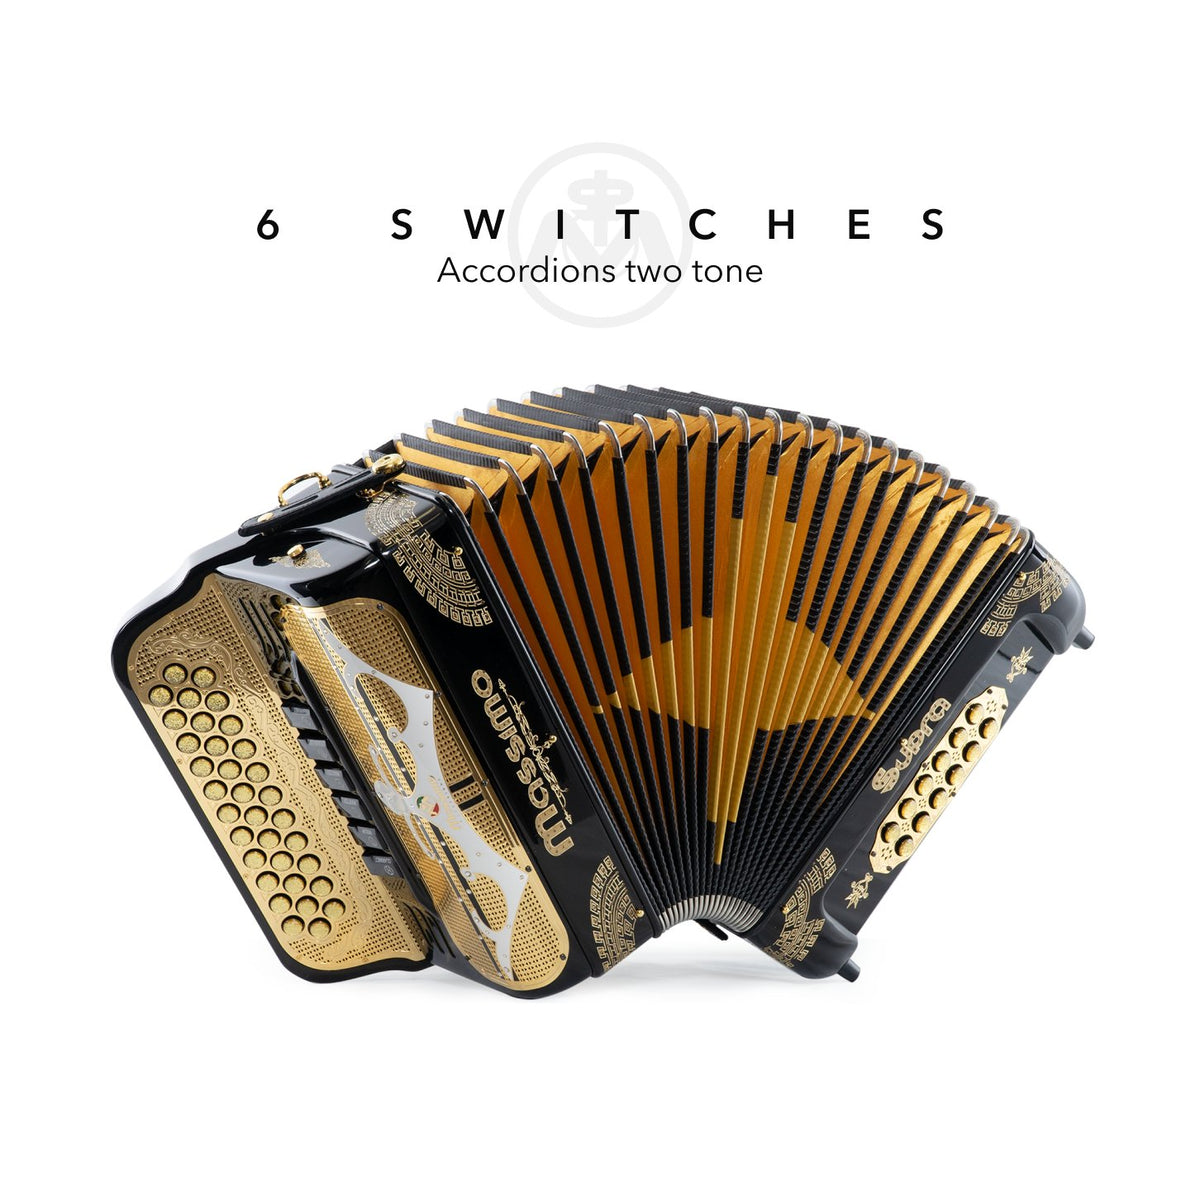 Accordions 2 tone or 6 Switches – Tagged 